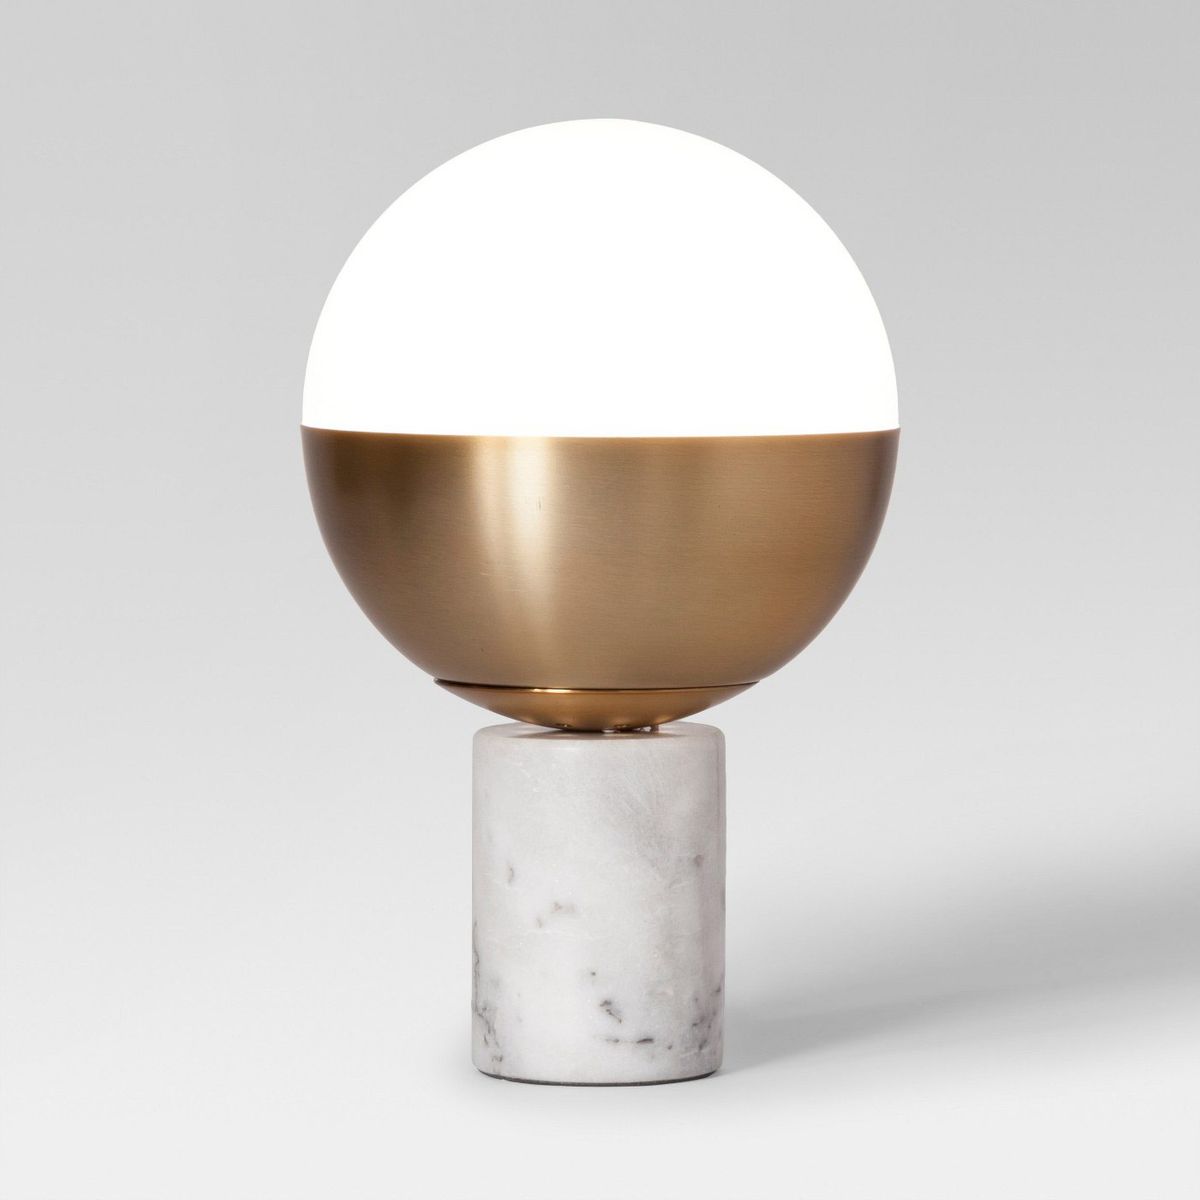 The 35 Table Lamps Chosen By Designers, Touch Table Lamp Base Target